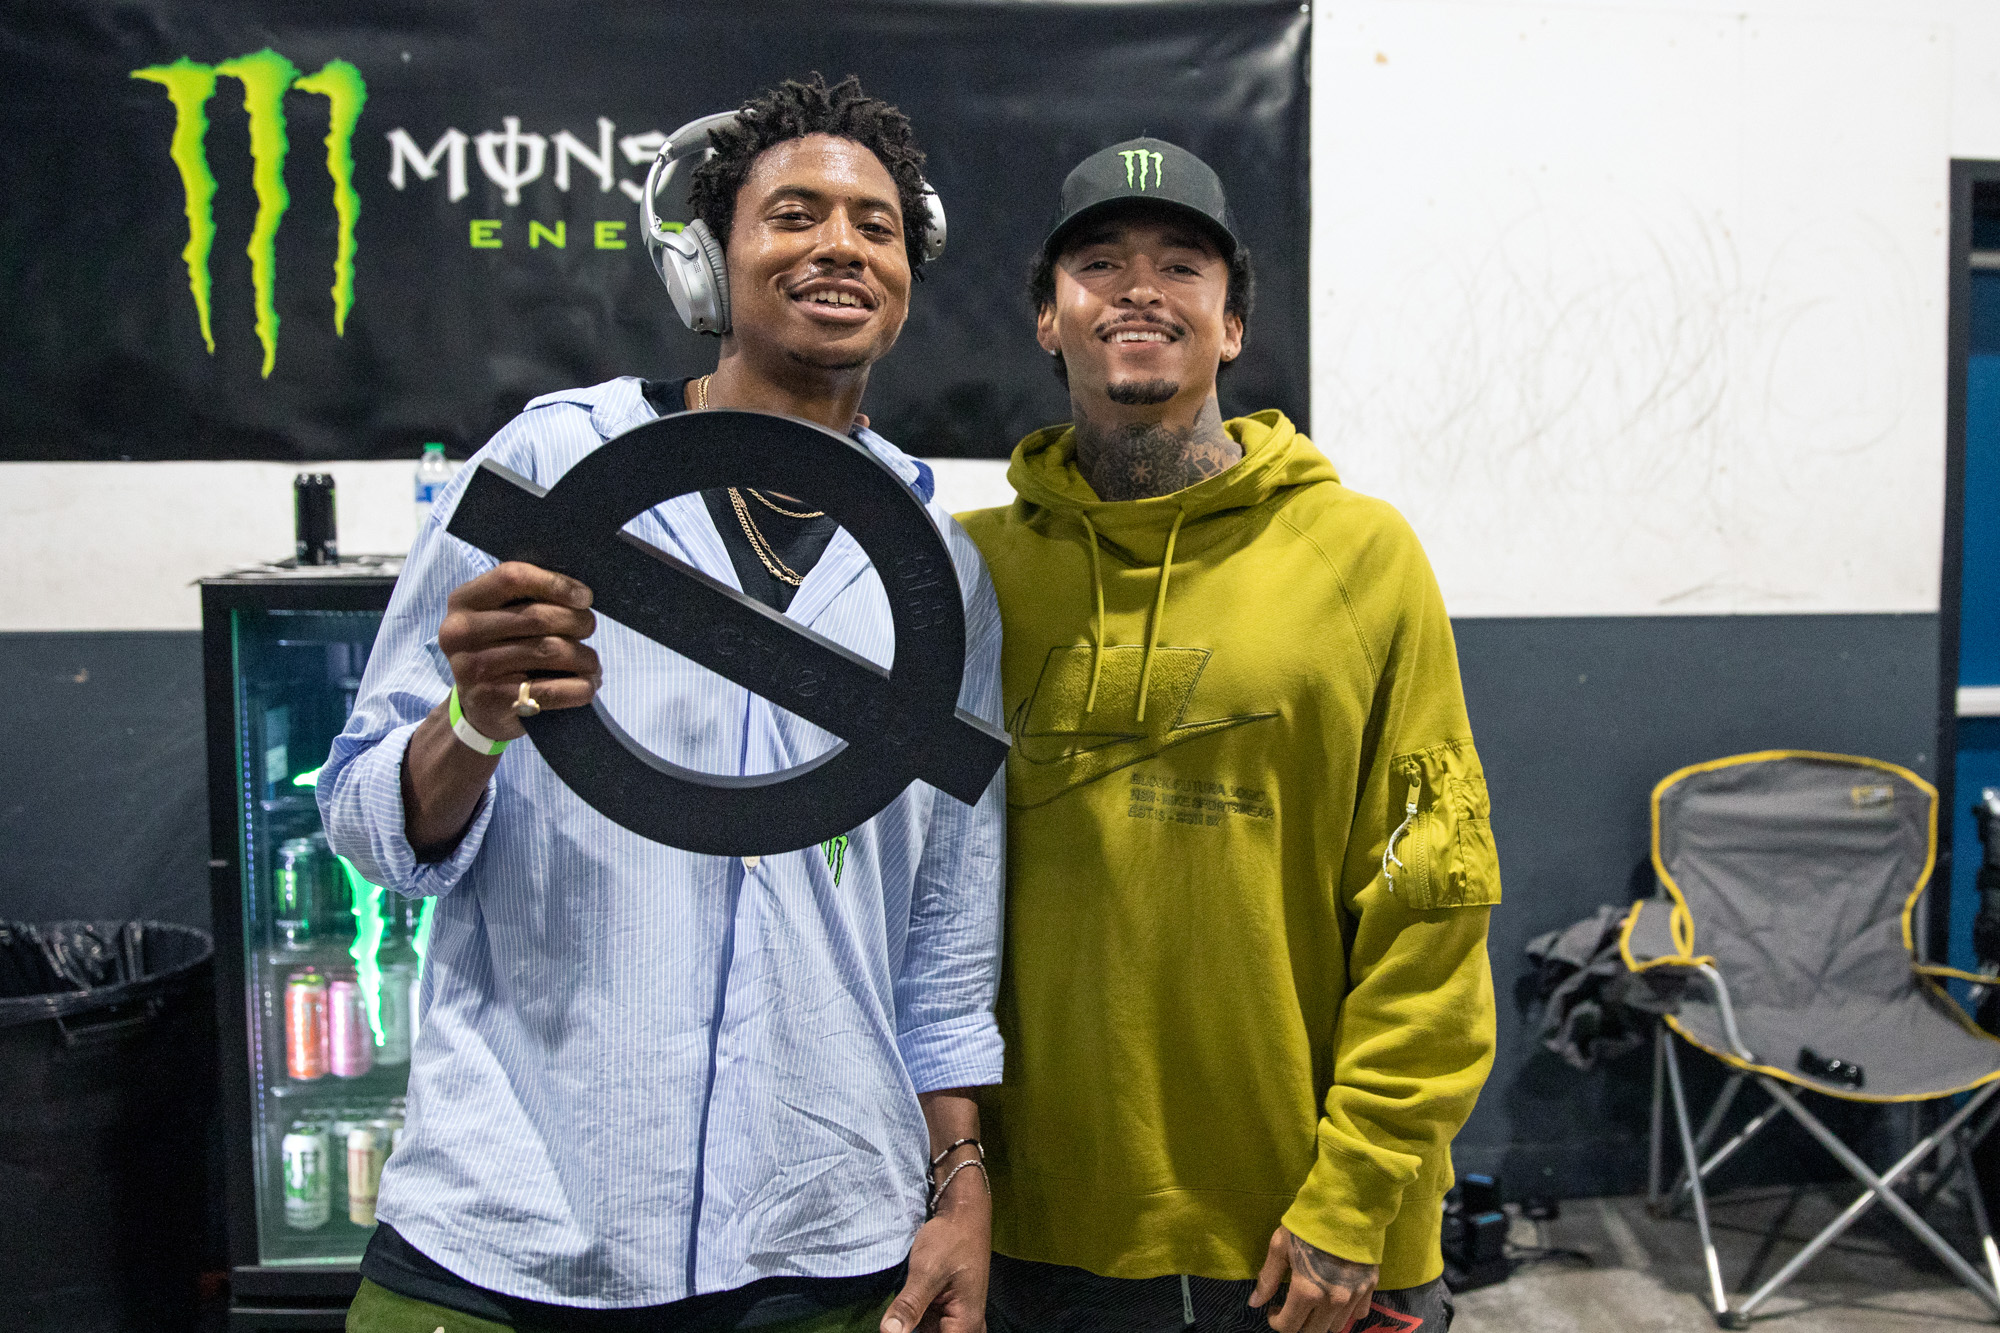 Monster Energy’s Nyjah Huston with Ishod Wair Who Took First Place in Street League Skateboarding “Unsanctioned 2” Pro Skateboarding Contest at Volcom Skatepark